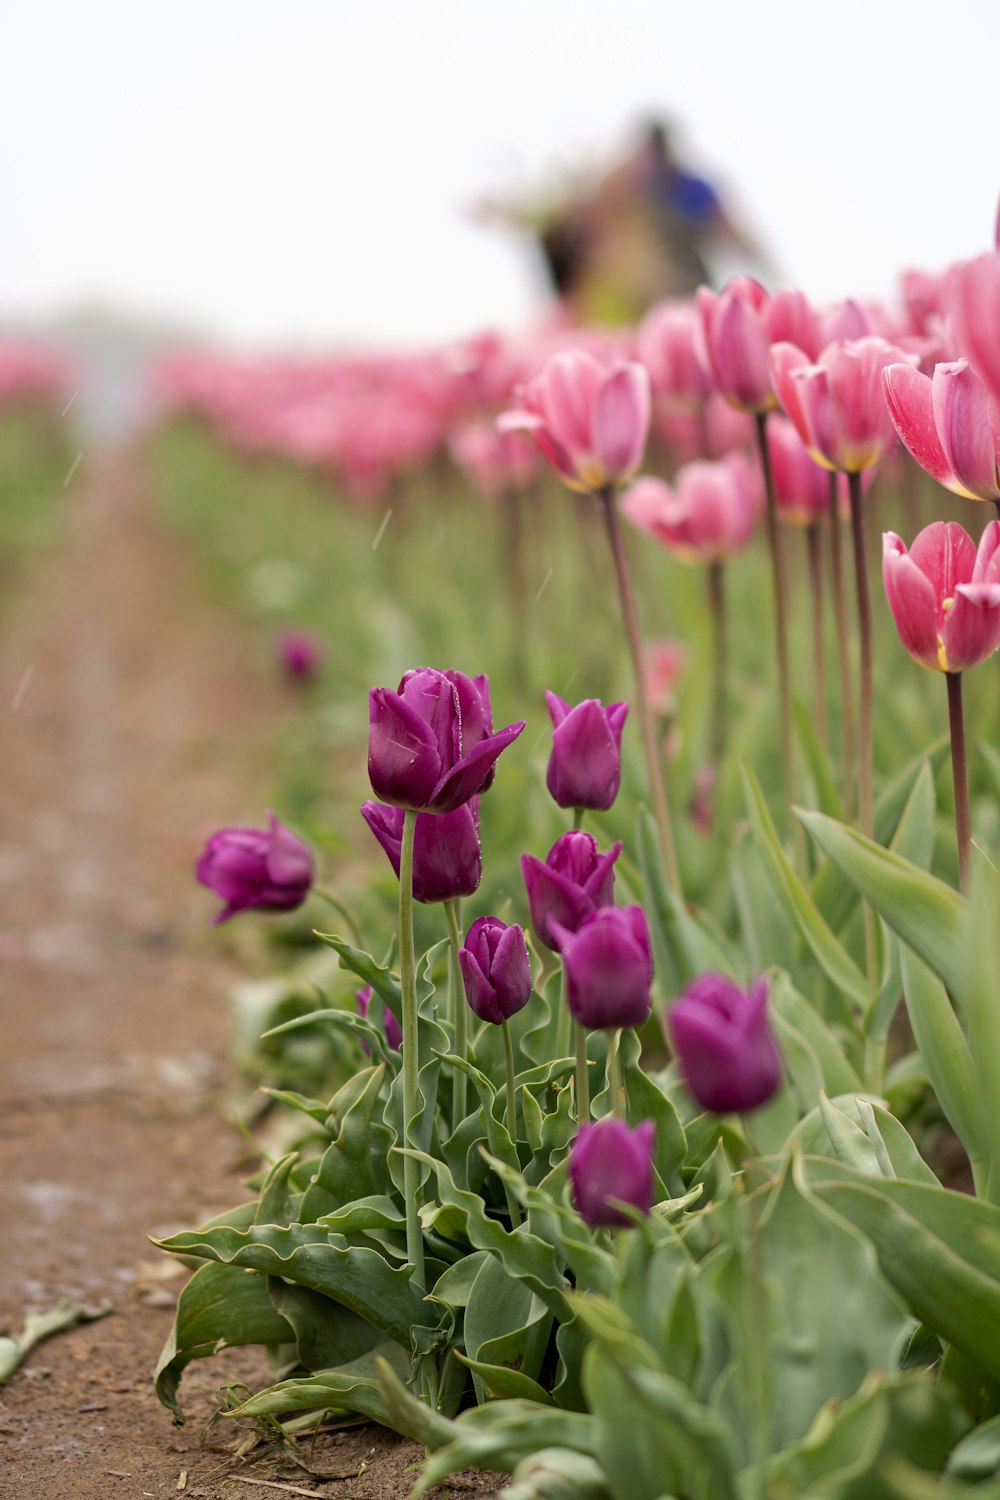 a field of pink tulips with a person in the background